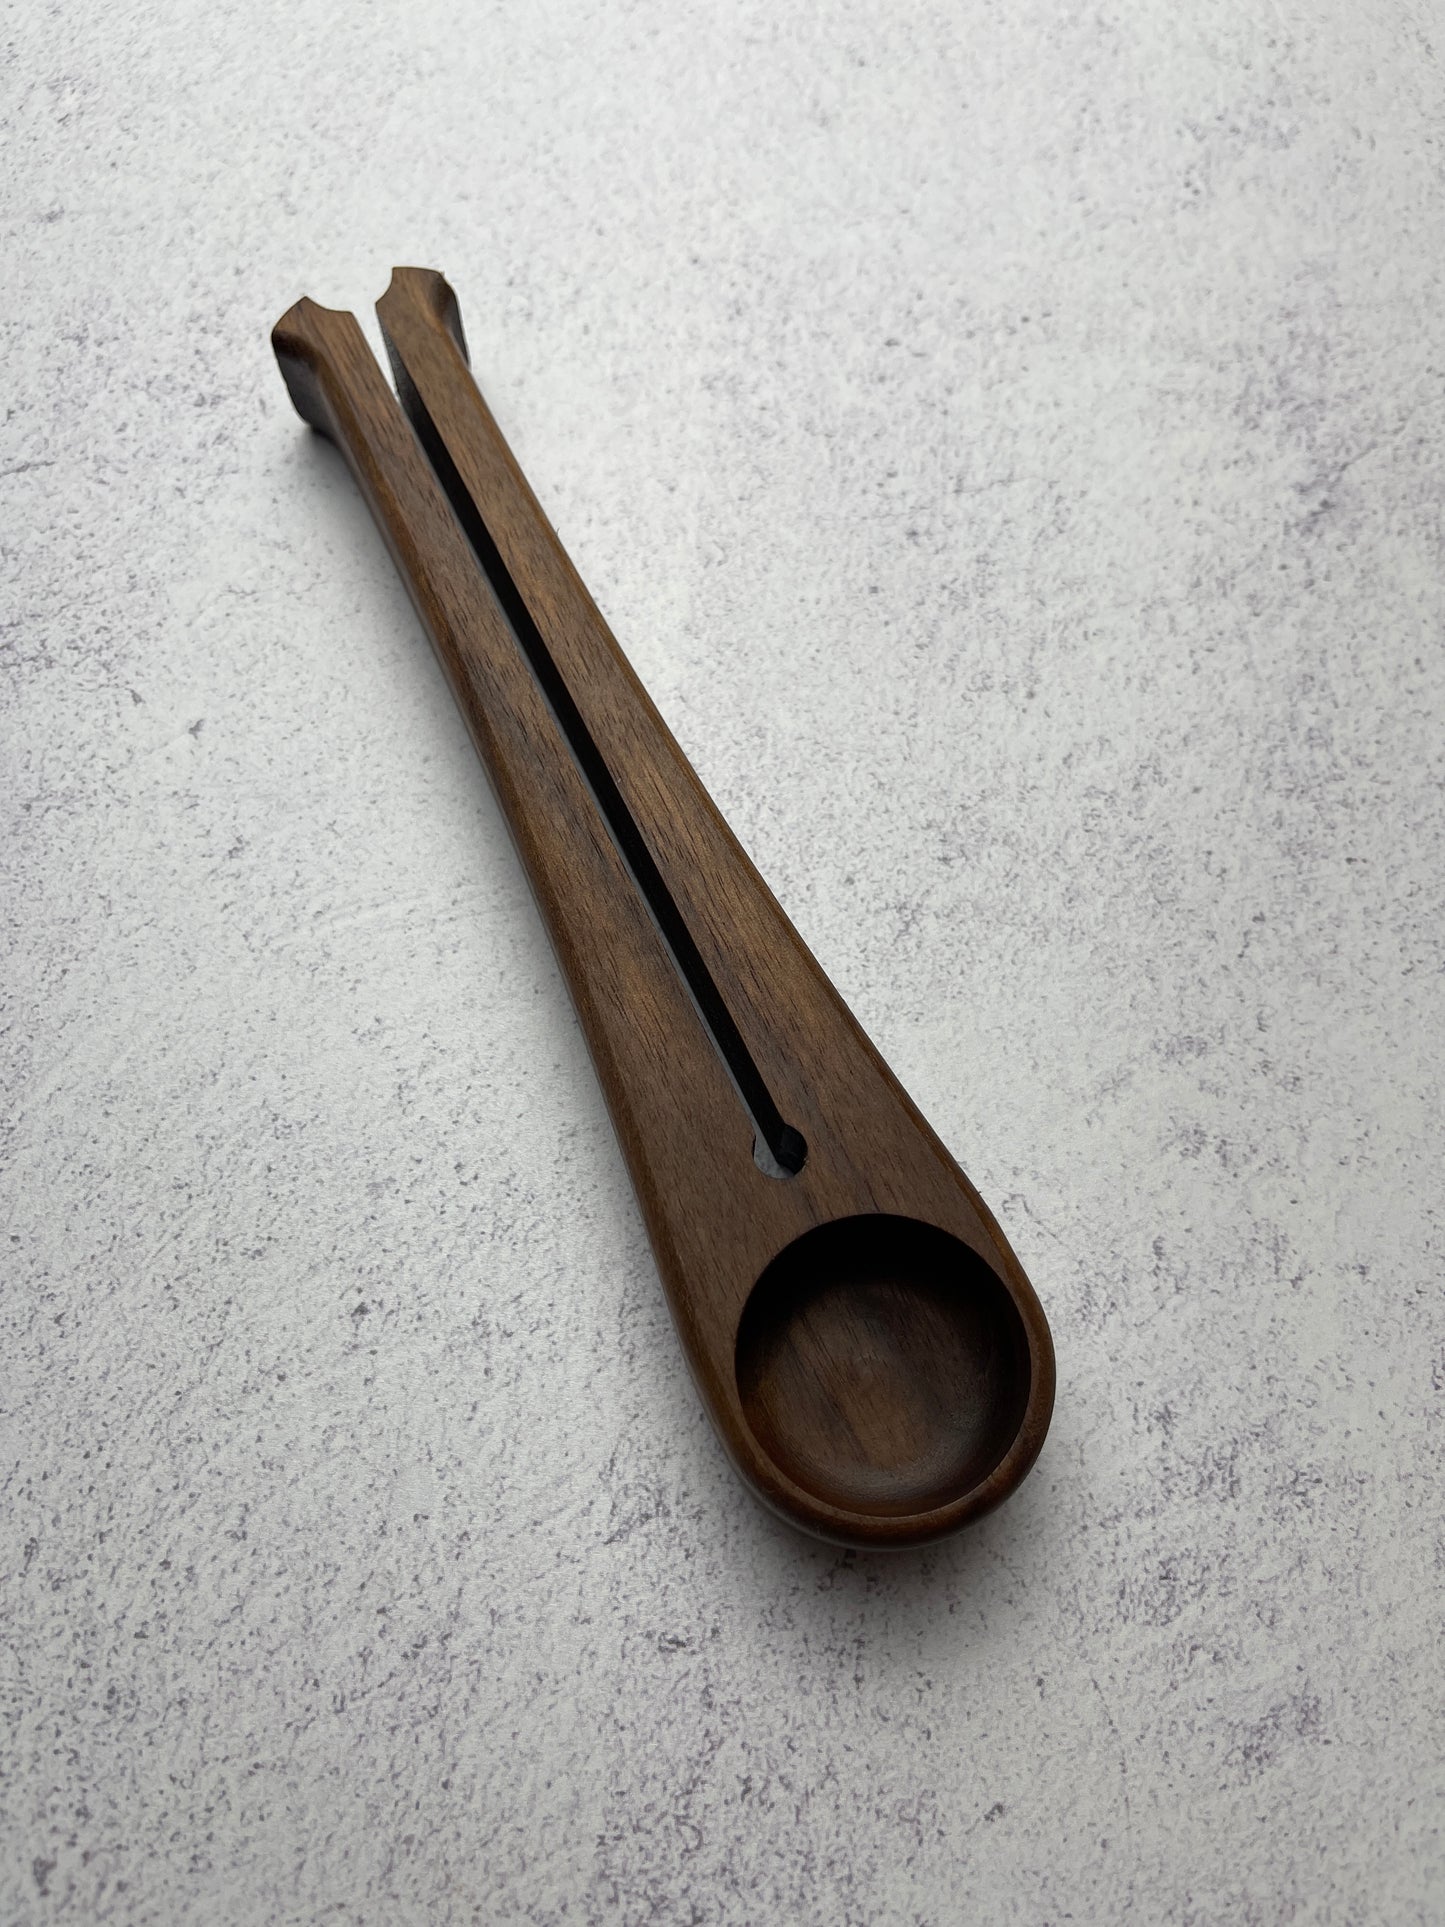 Coffee scoop and clip